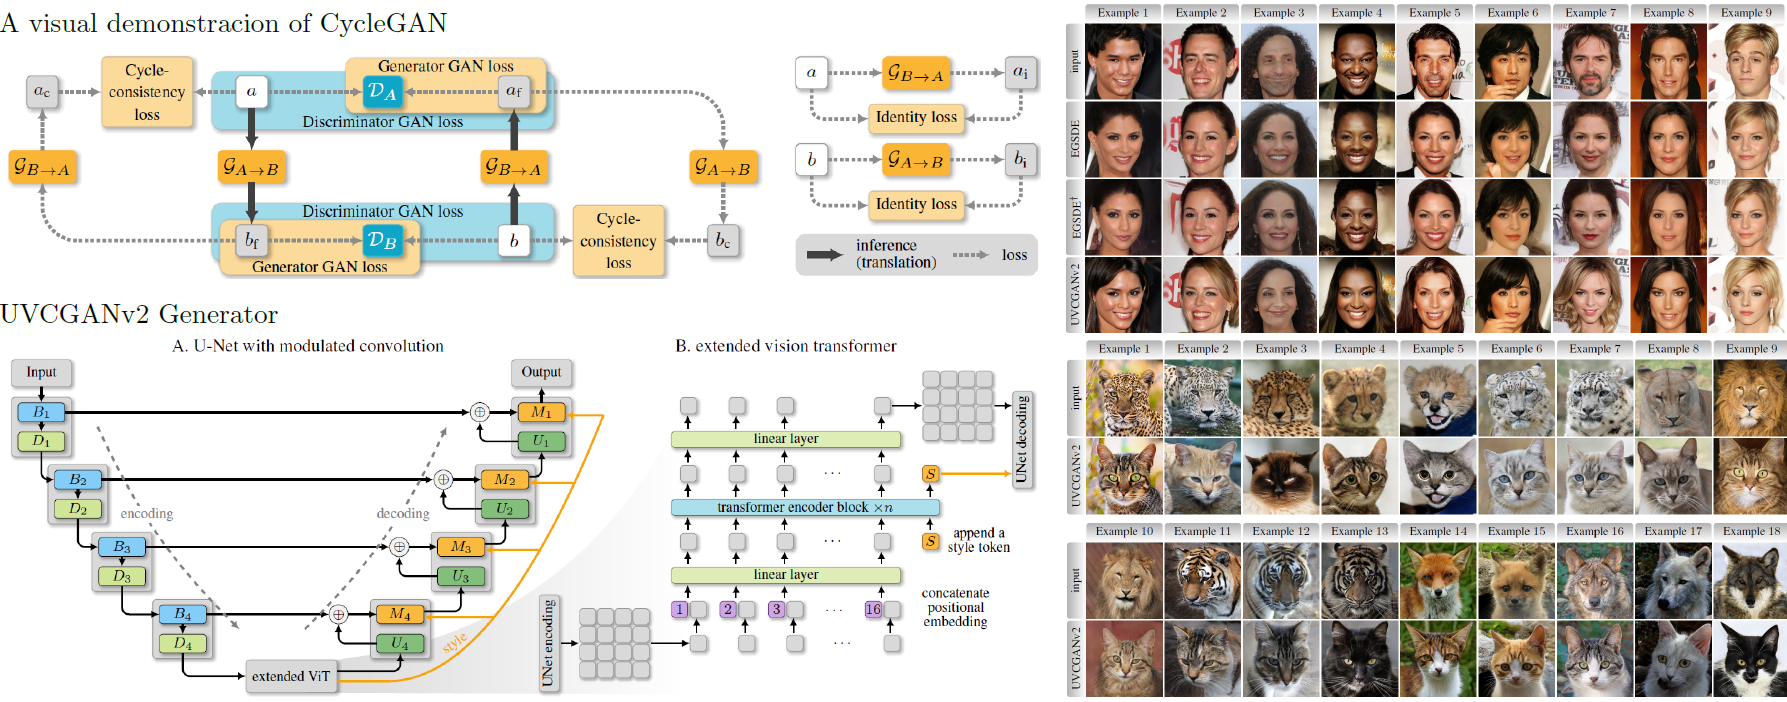 Rethinking CycleGAN: Improving Quality of GANs for Unpaired Image-to-Image Translation